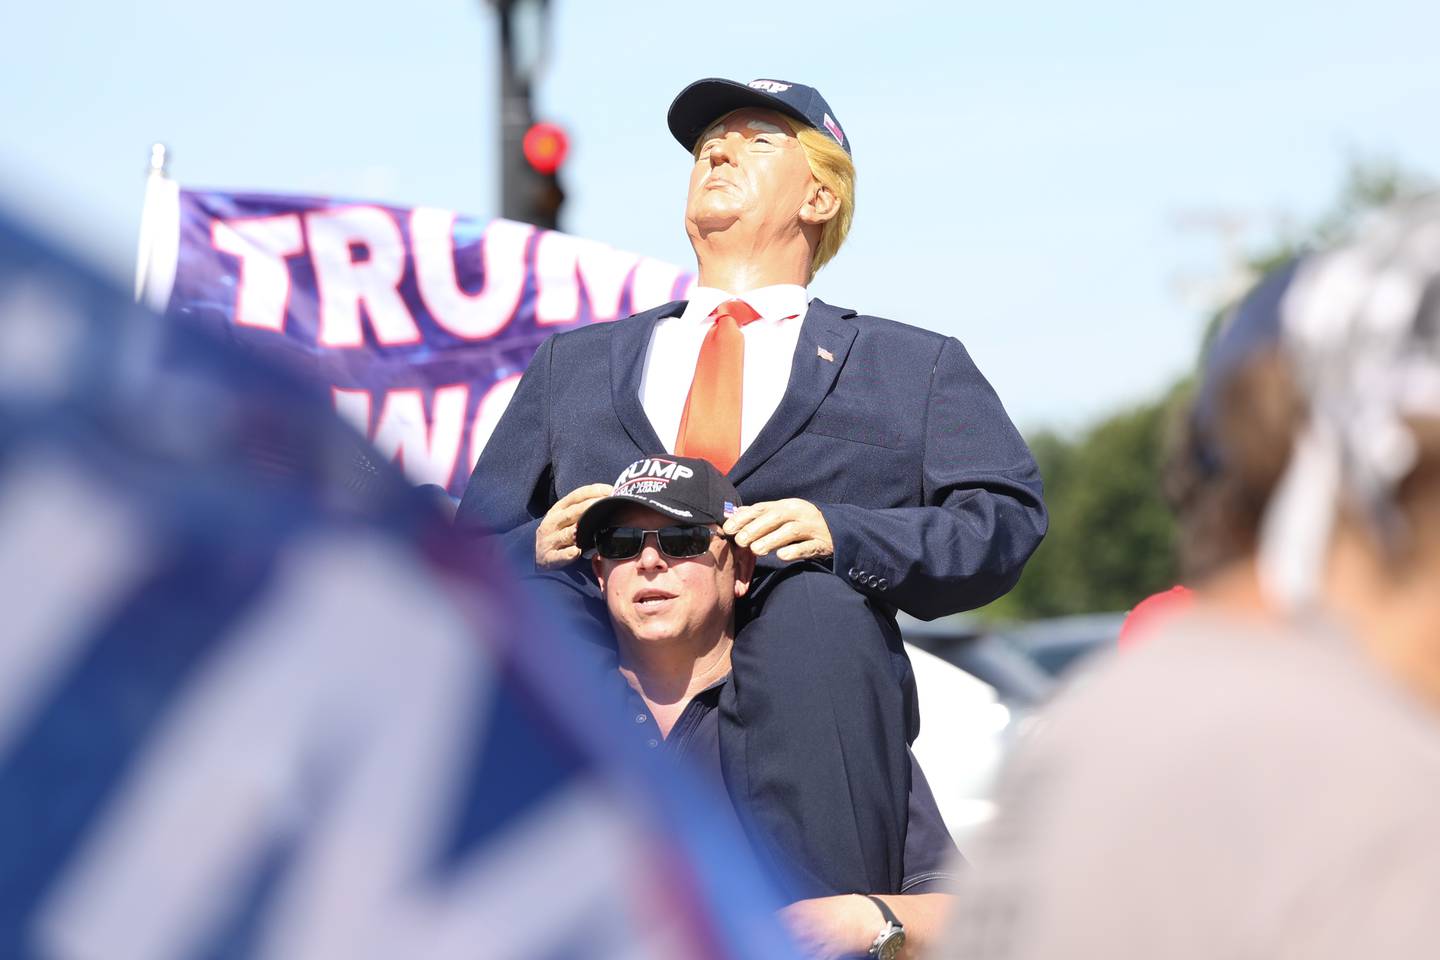 Jeff Berger, of Naperville, carries a Donald Trump mannequin during a protest along Lockport Street in Plainfield before the arrival of Vice President Kamala Harris. Friday, June 24, 2022 in Plainfield.